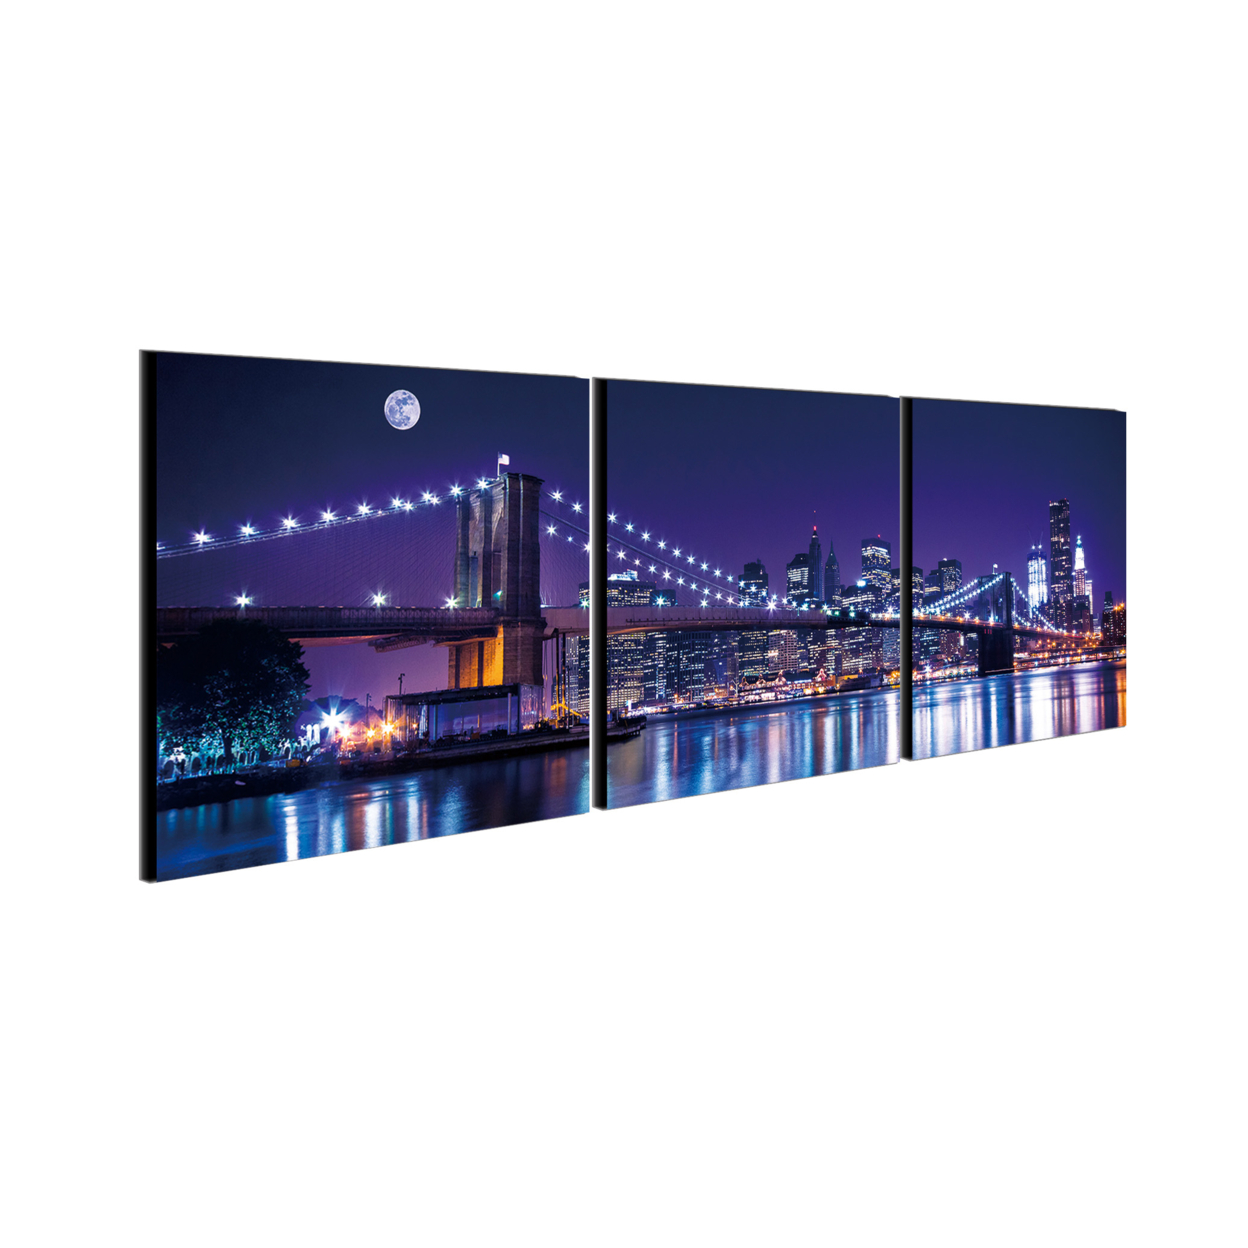 Cityline 3 Piece Wrapped Canvas Wall Art Print 27.5x82 Inches